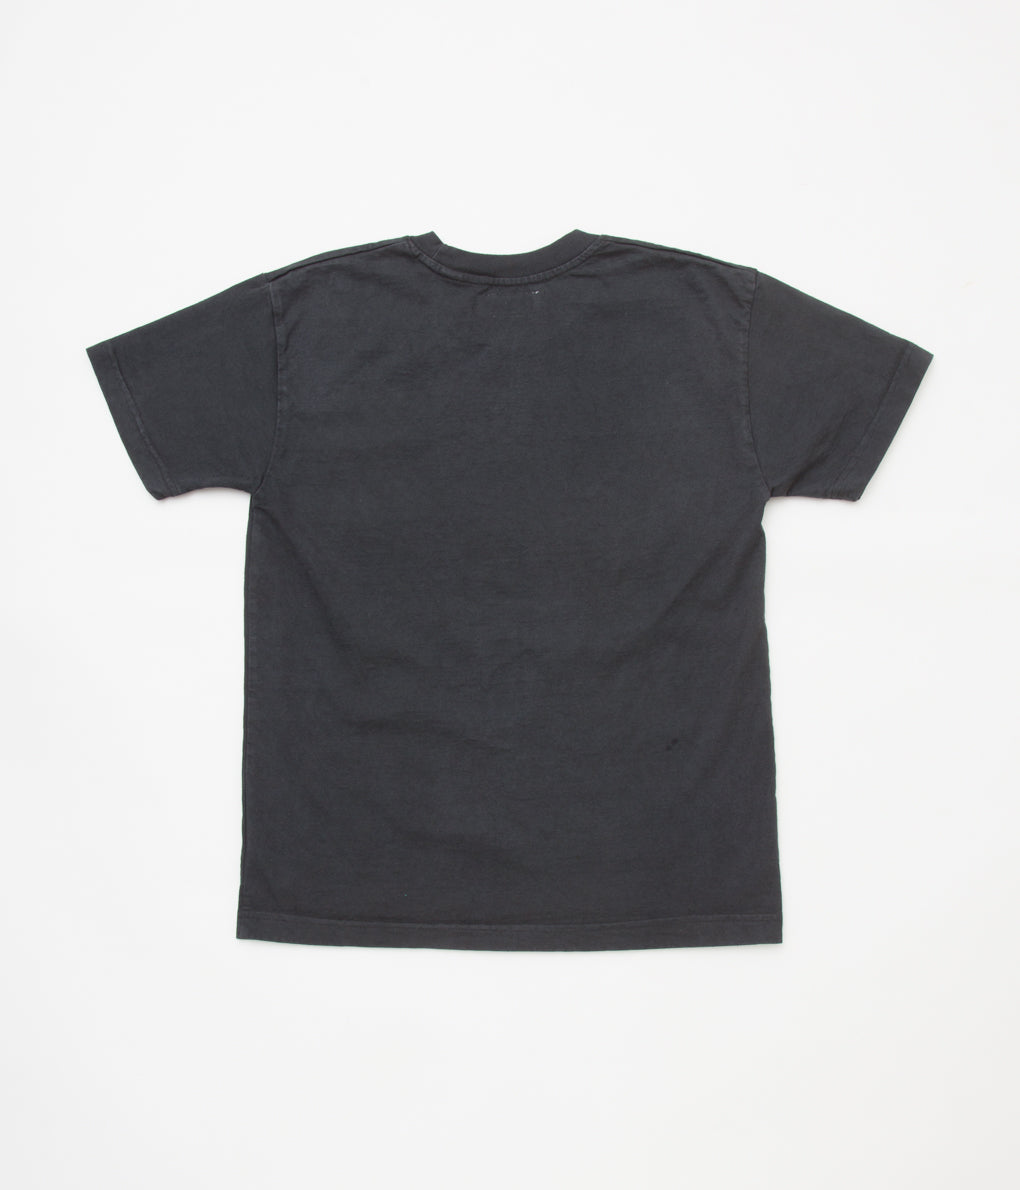 SOFT GOODS ''HEAVY WEIGHT CREW NECK TEE LONG TAIL'' (VINTAGE BLACK)